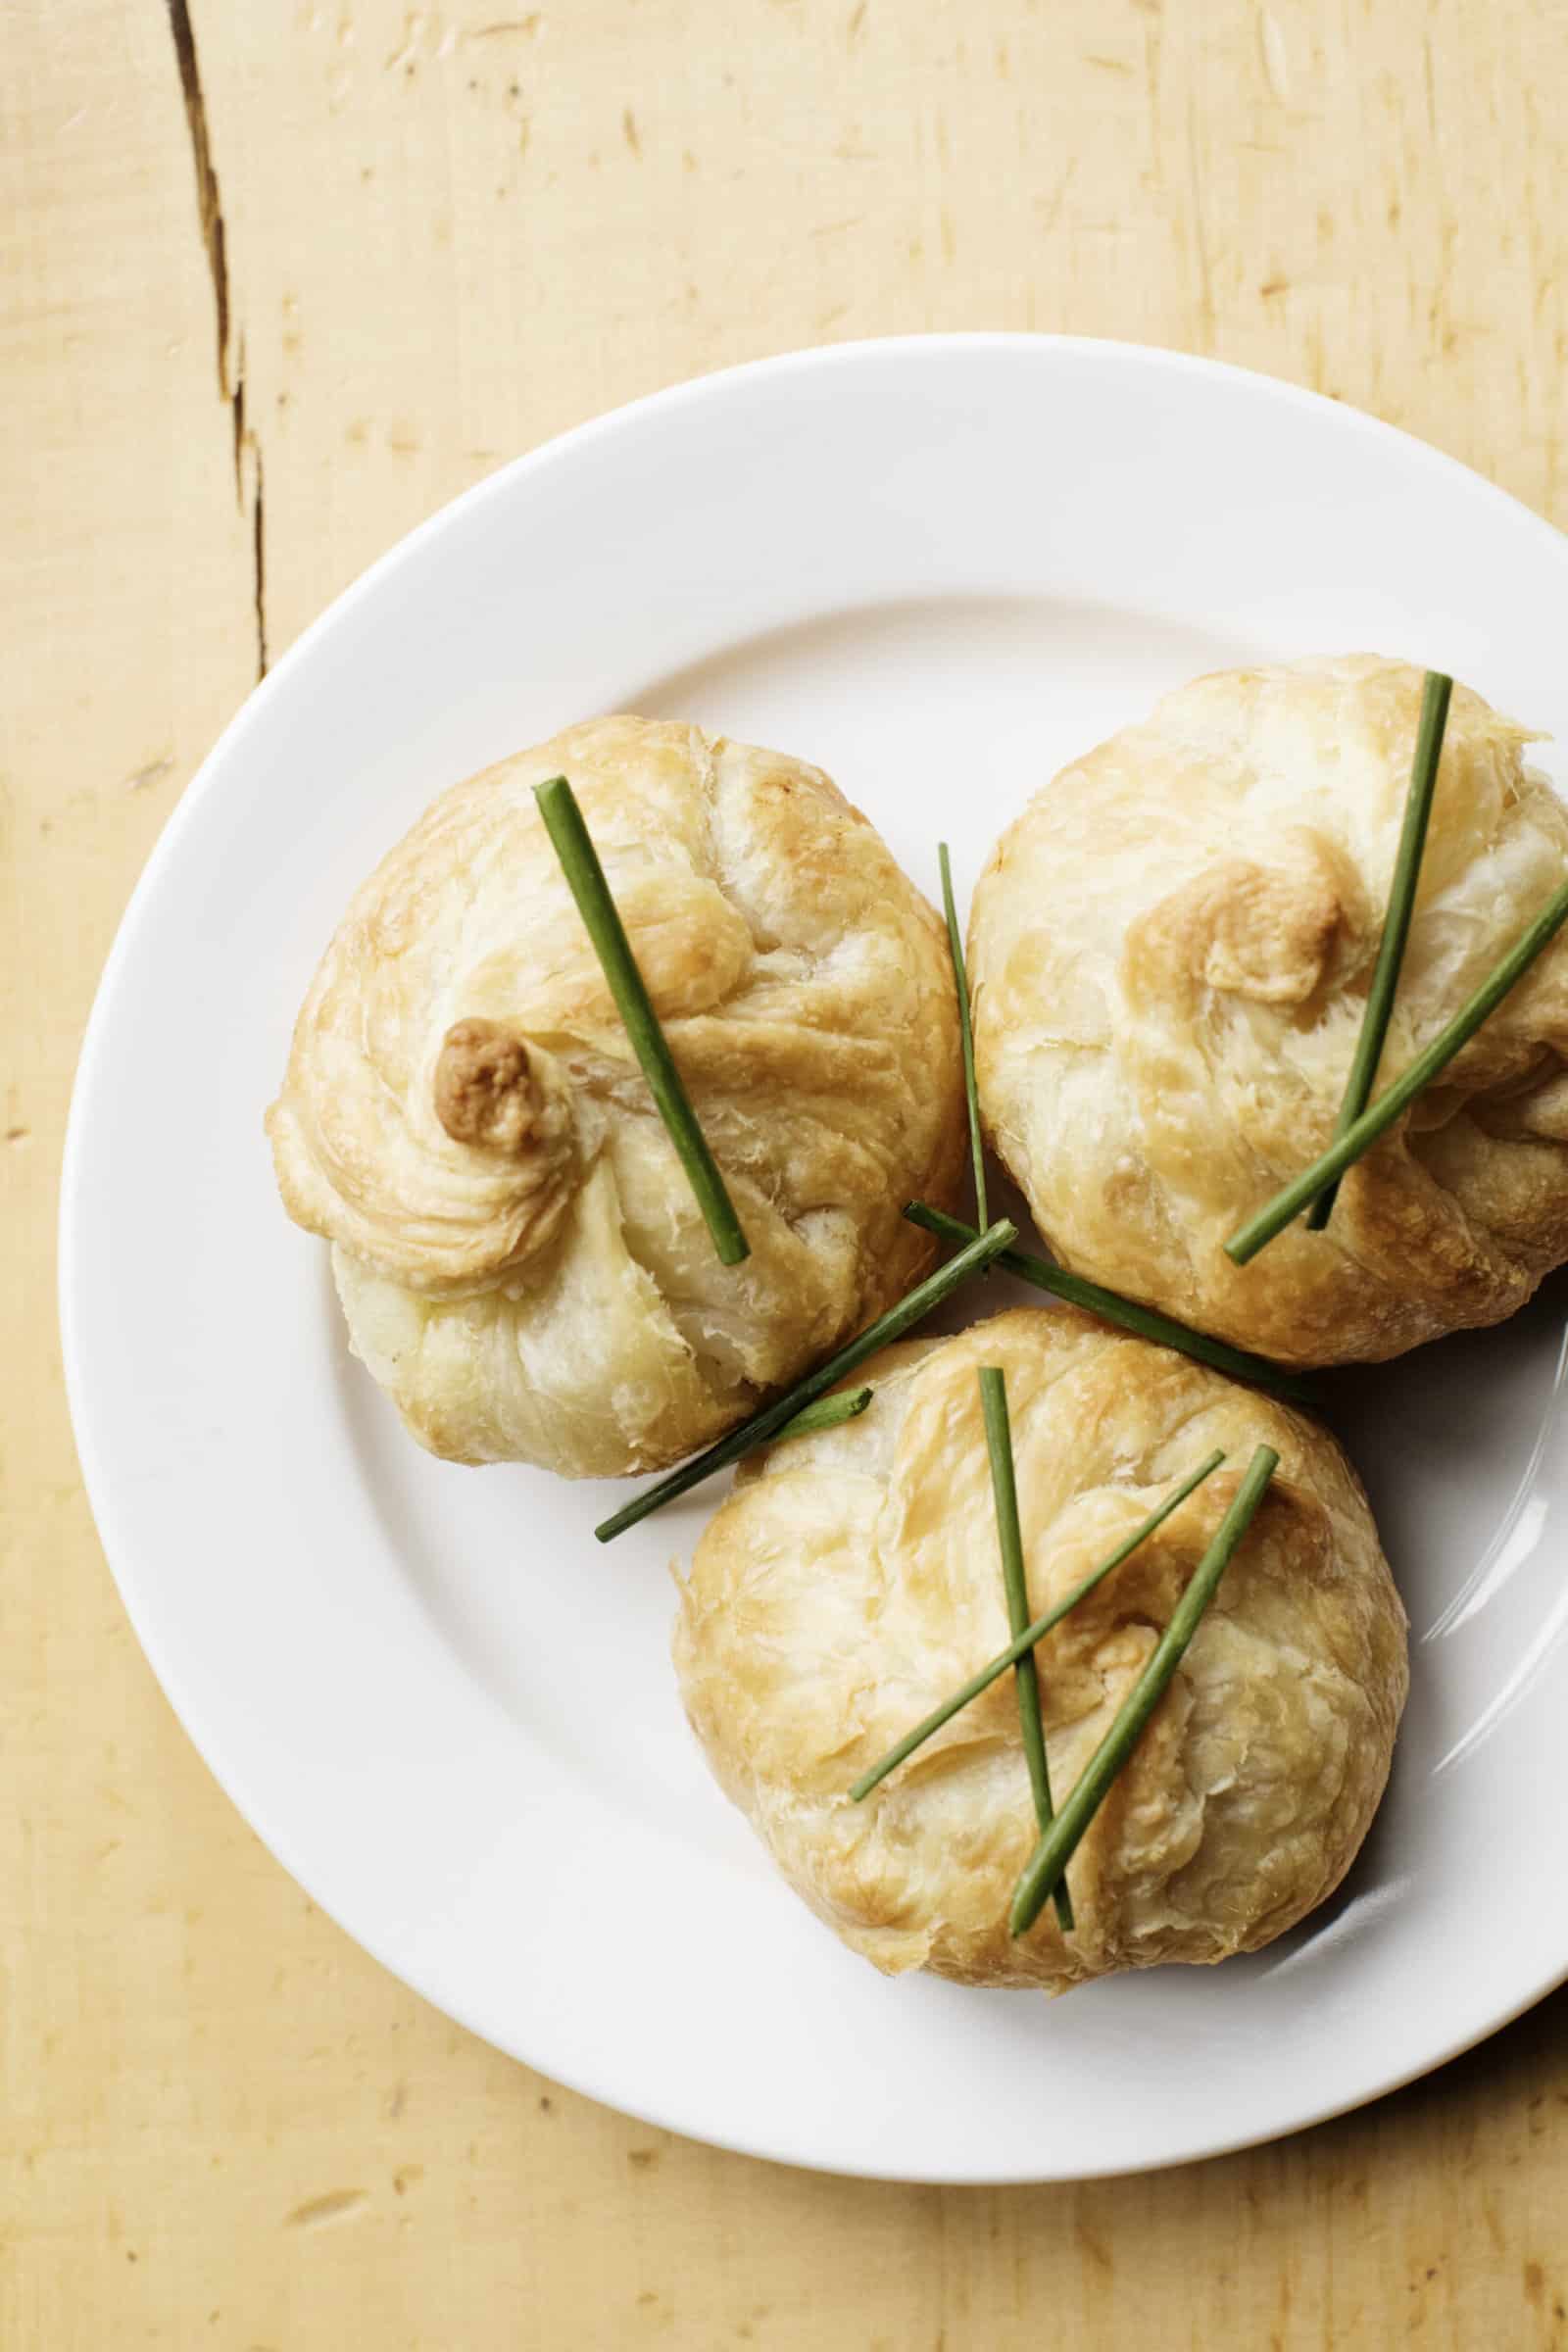 potato knishes [3], a popular side dish for Rosh Hashanah and yum! Kippur from yum! Kitchen and Bakery